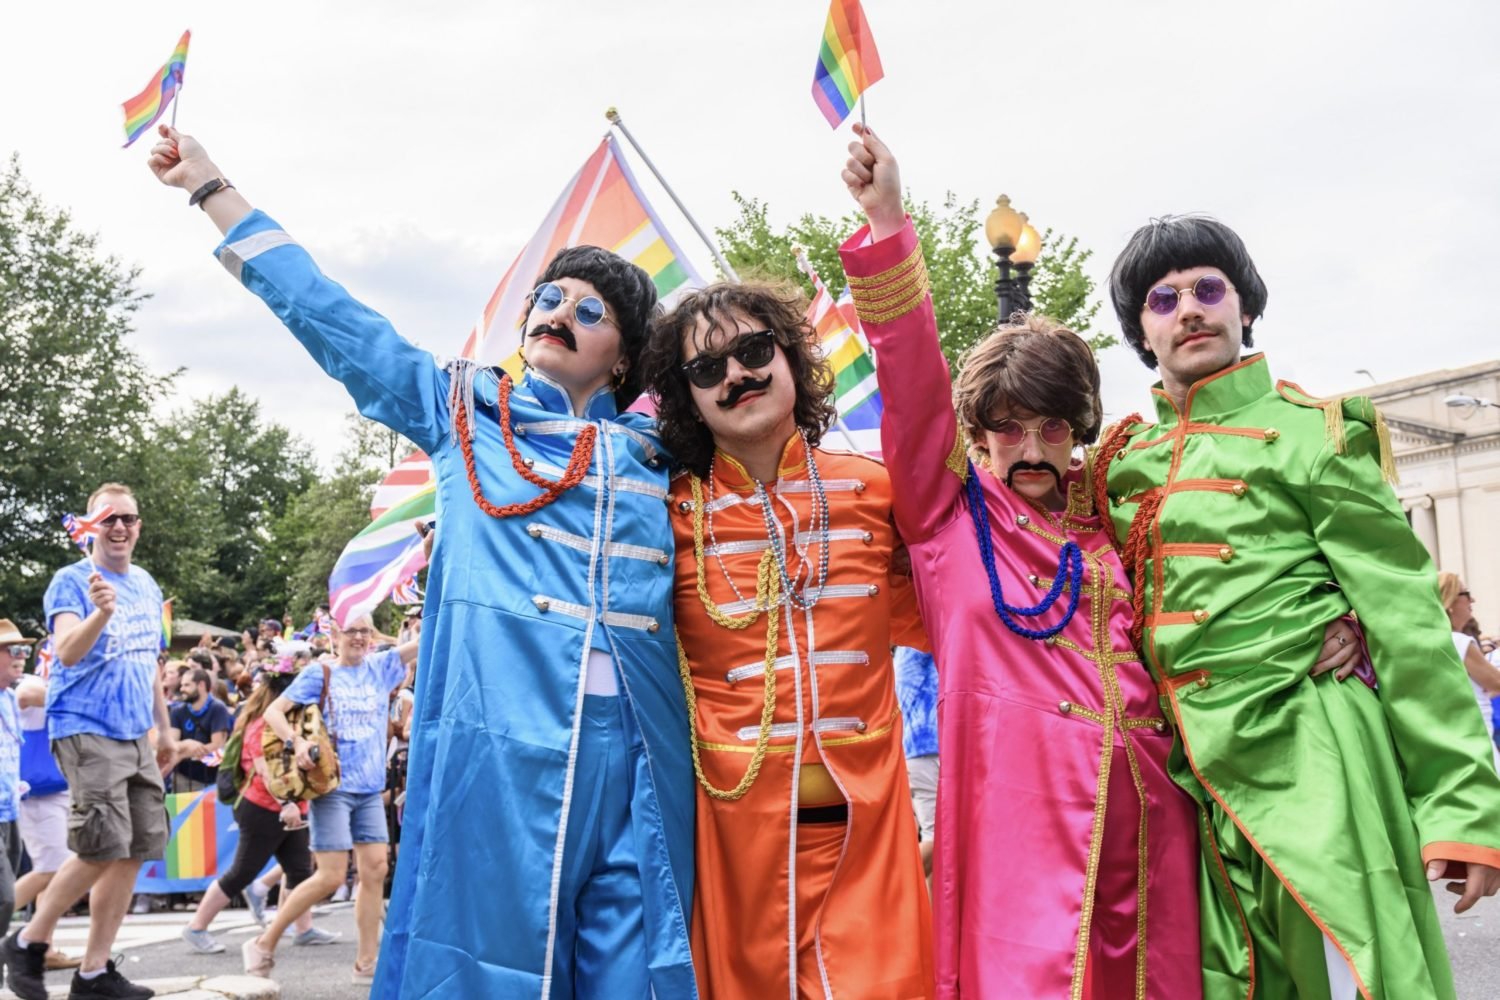 Embassy volunteers dressed as the Beatles wave rainbow flags during the Capital Pride Parade. Photo by Scott Marder.